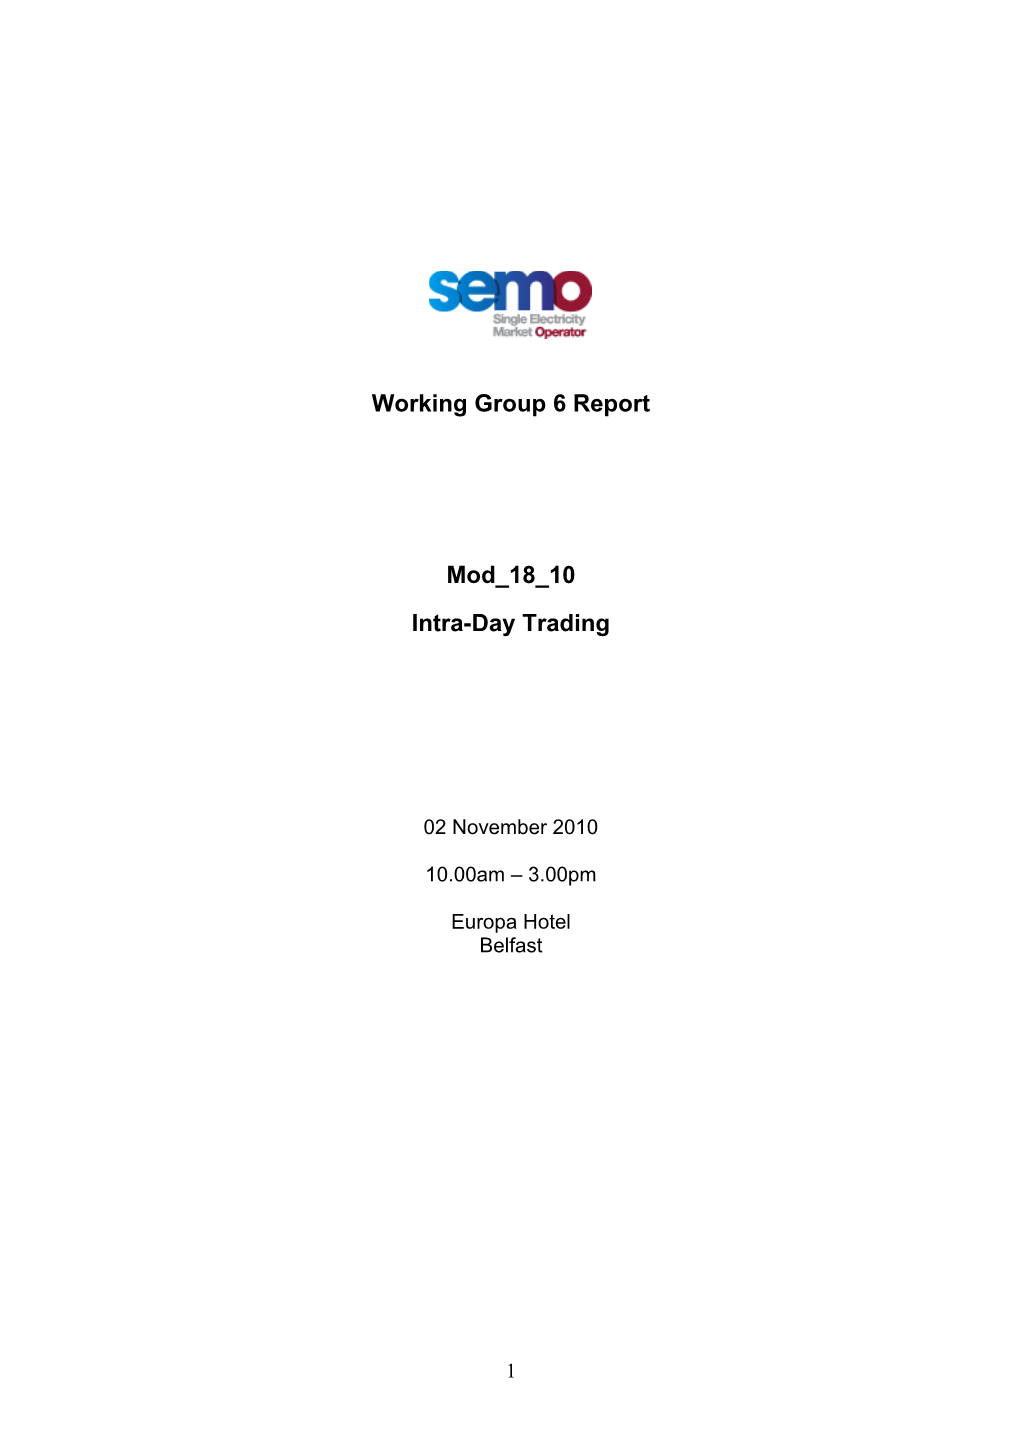 Working Group 6 Report